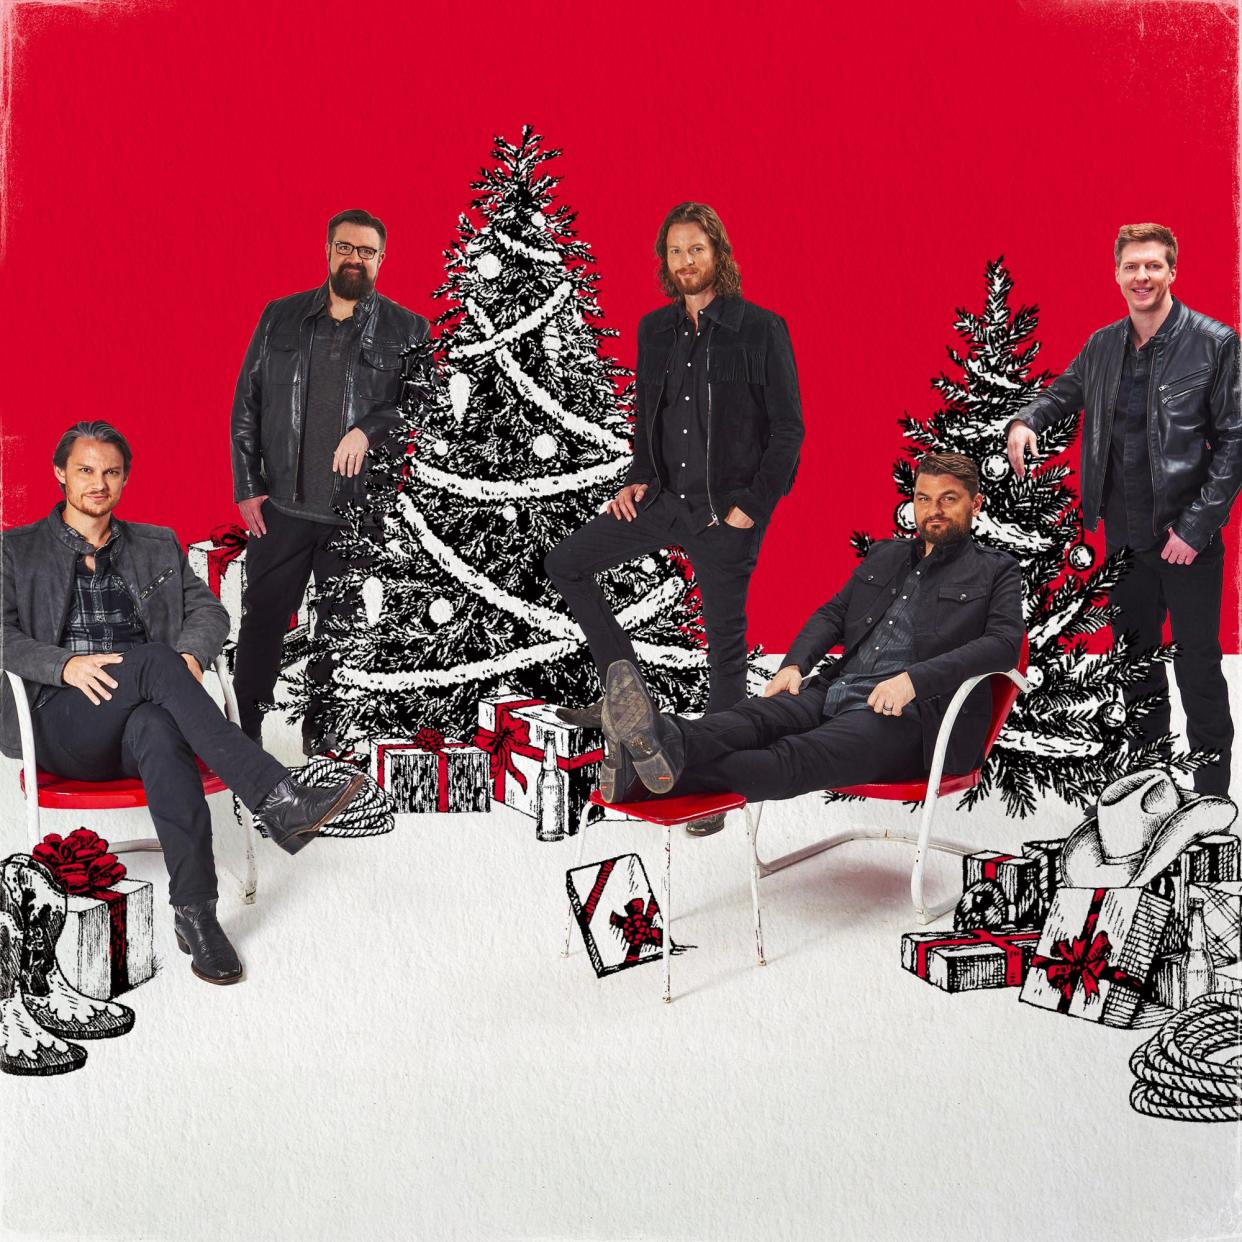 Country group Home Free will perform a holiday concert at 7:30 p.m. Sunday, Dec. 17, at Stephens Auditorium.